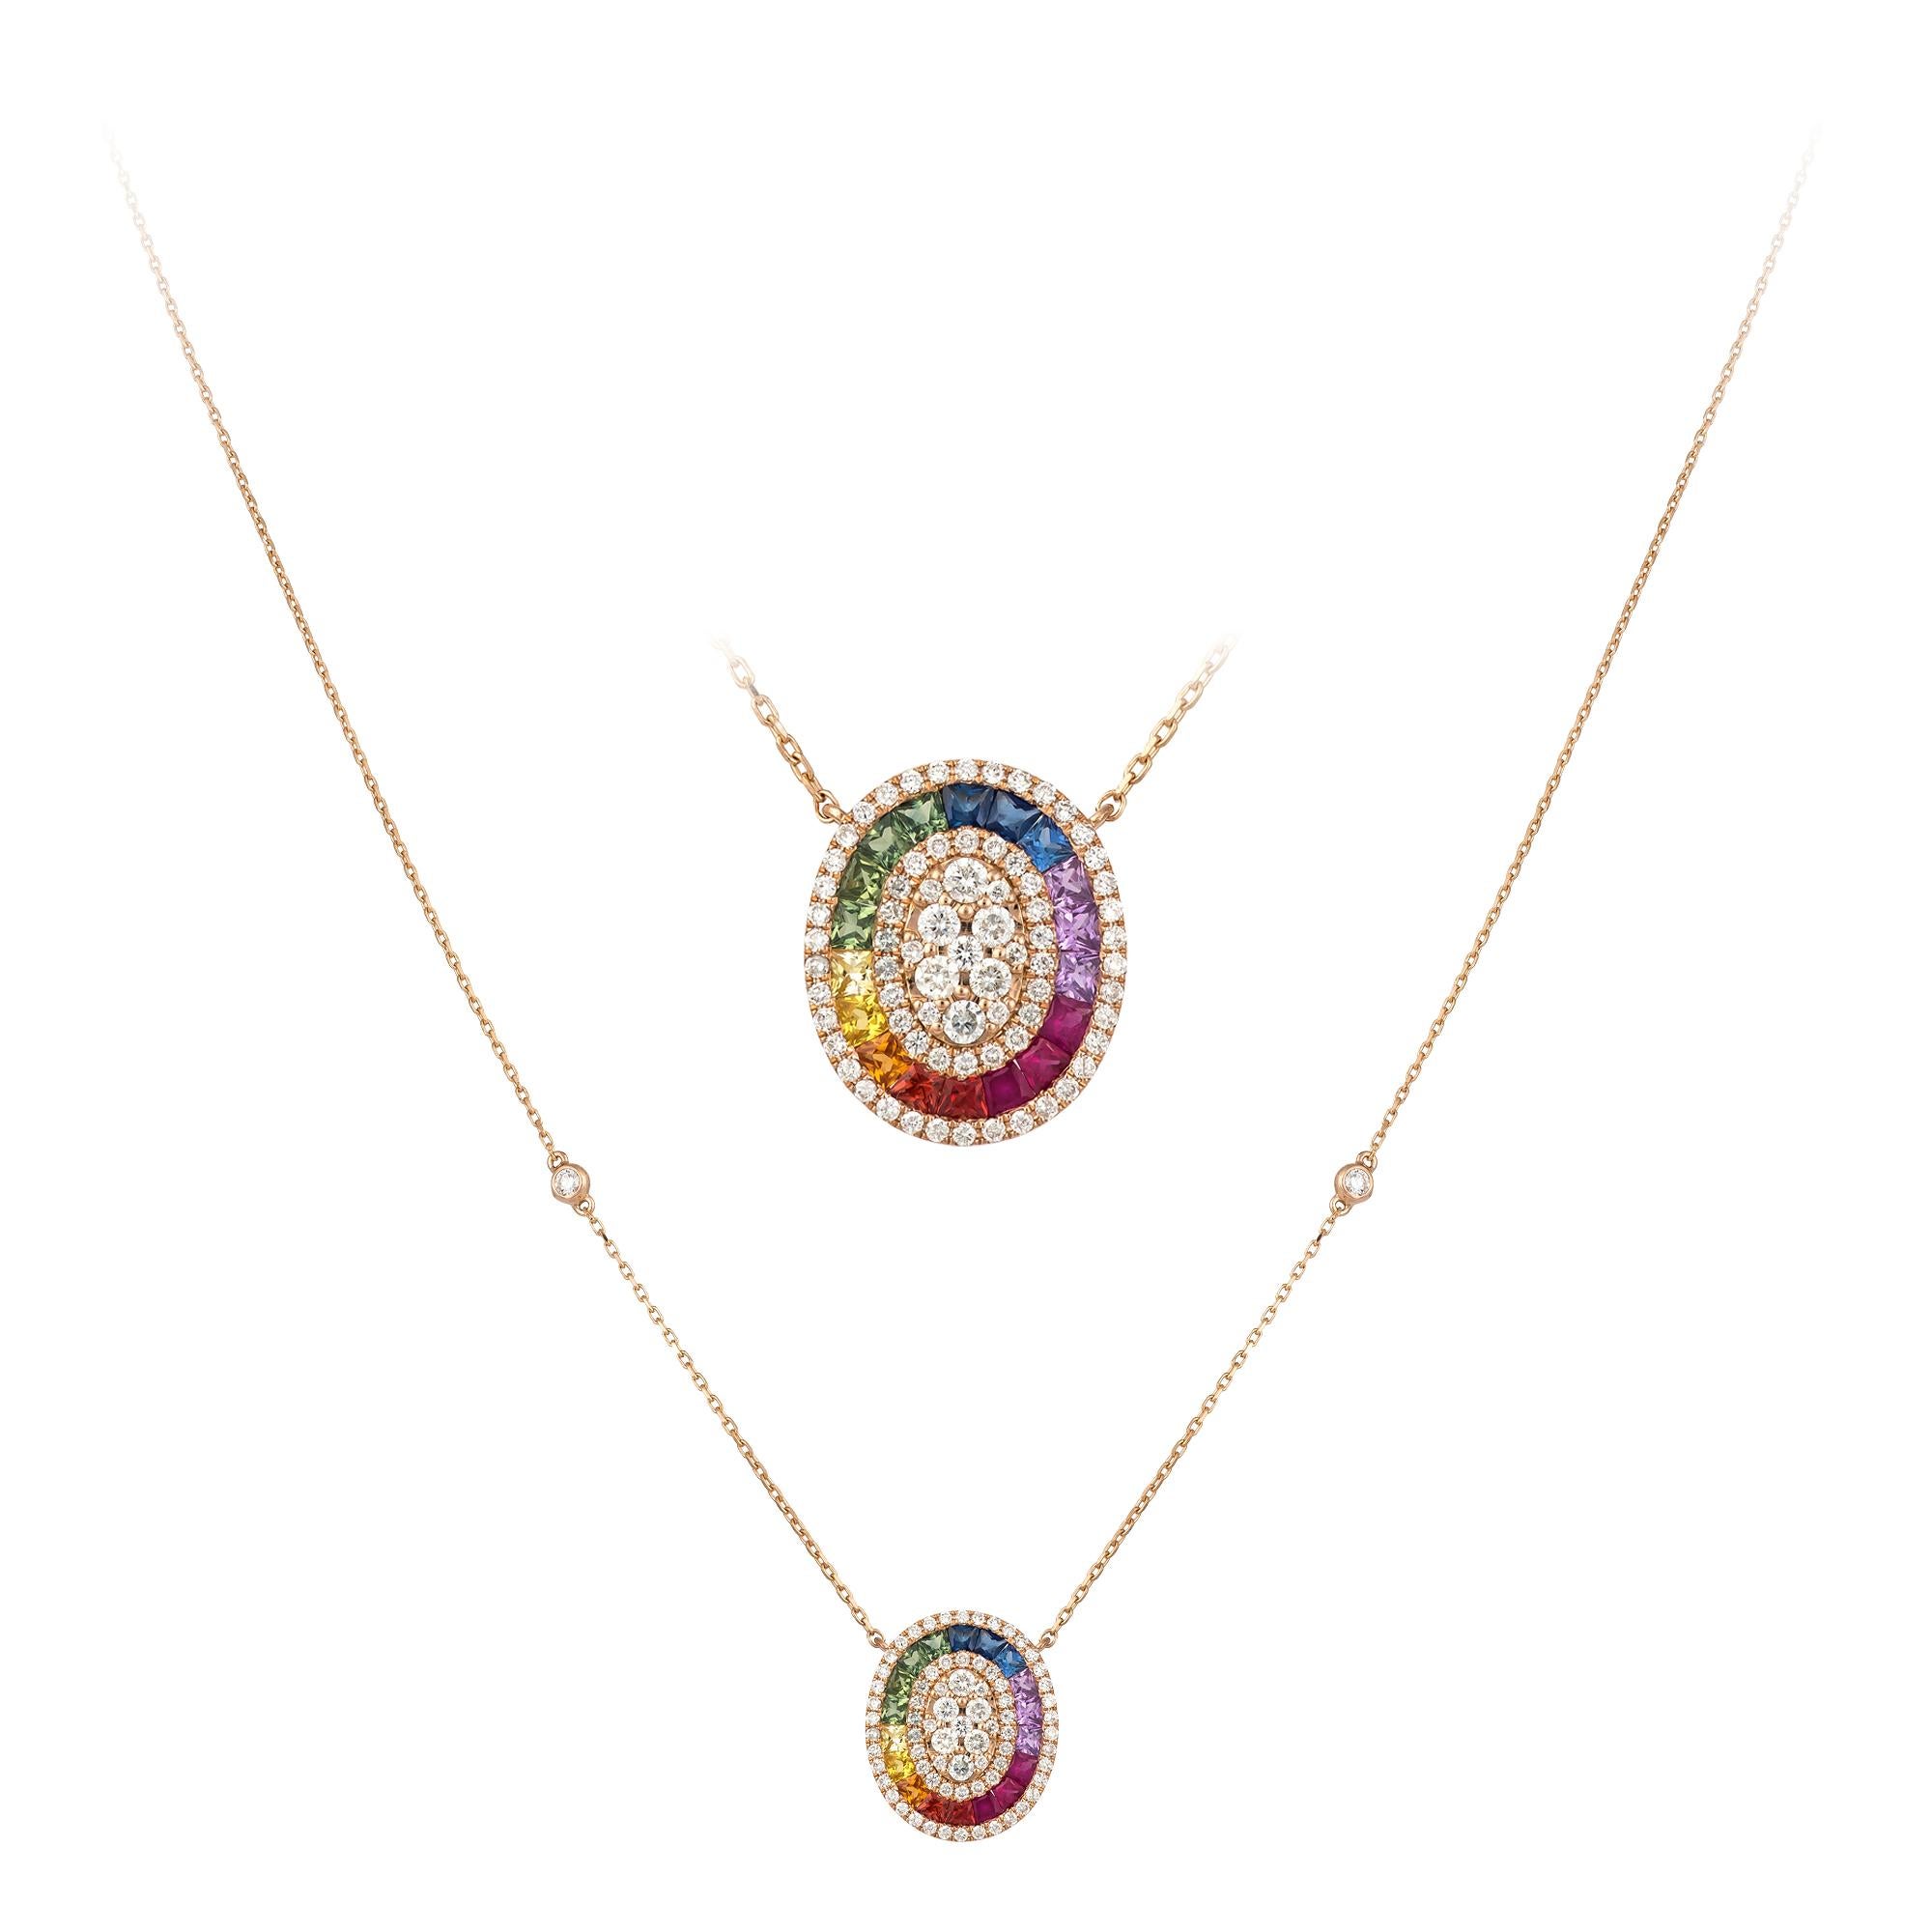 NECKLACE 18K Rose Gold 

Diamond 0.63 Cts/75 Pcs 
Multi Sapphire 1.53 Cts/18 Pcs

With a heritage of ancient fine Swiss jewelry traditions, NATKINA is a Geneva based jewellery brand, which creates modern jewellery masterpieces suitable for every day